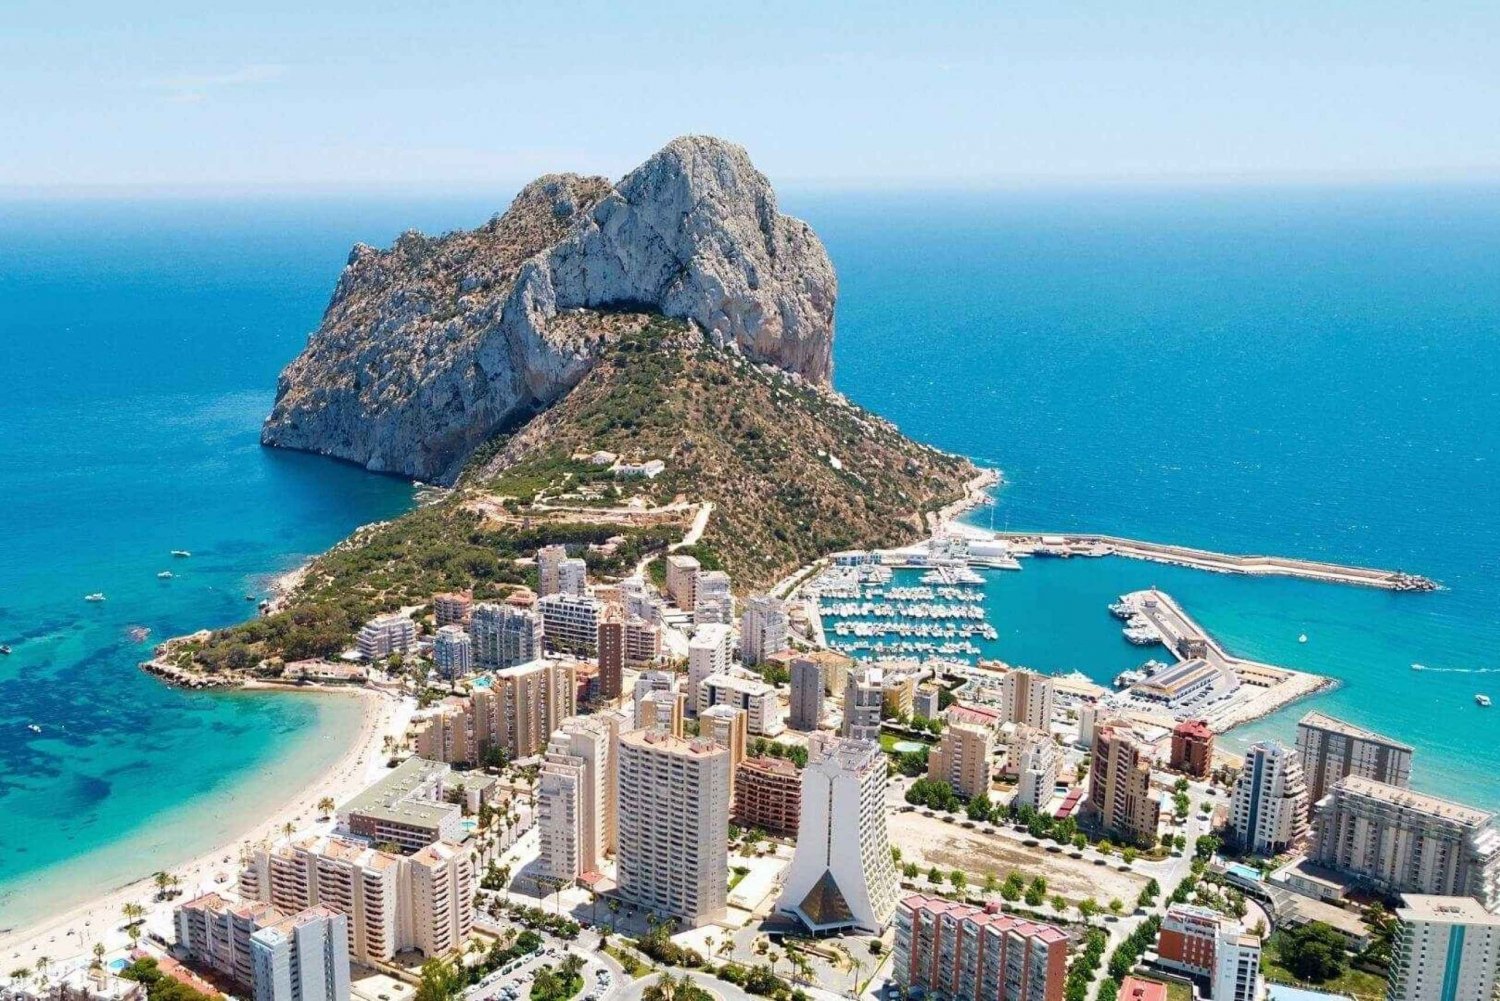 From Valencia: 1 day in the beautiful seaside town of Calpe